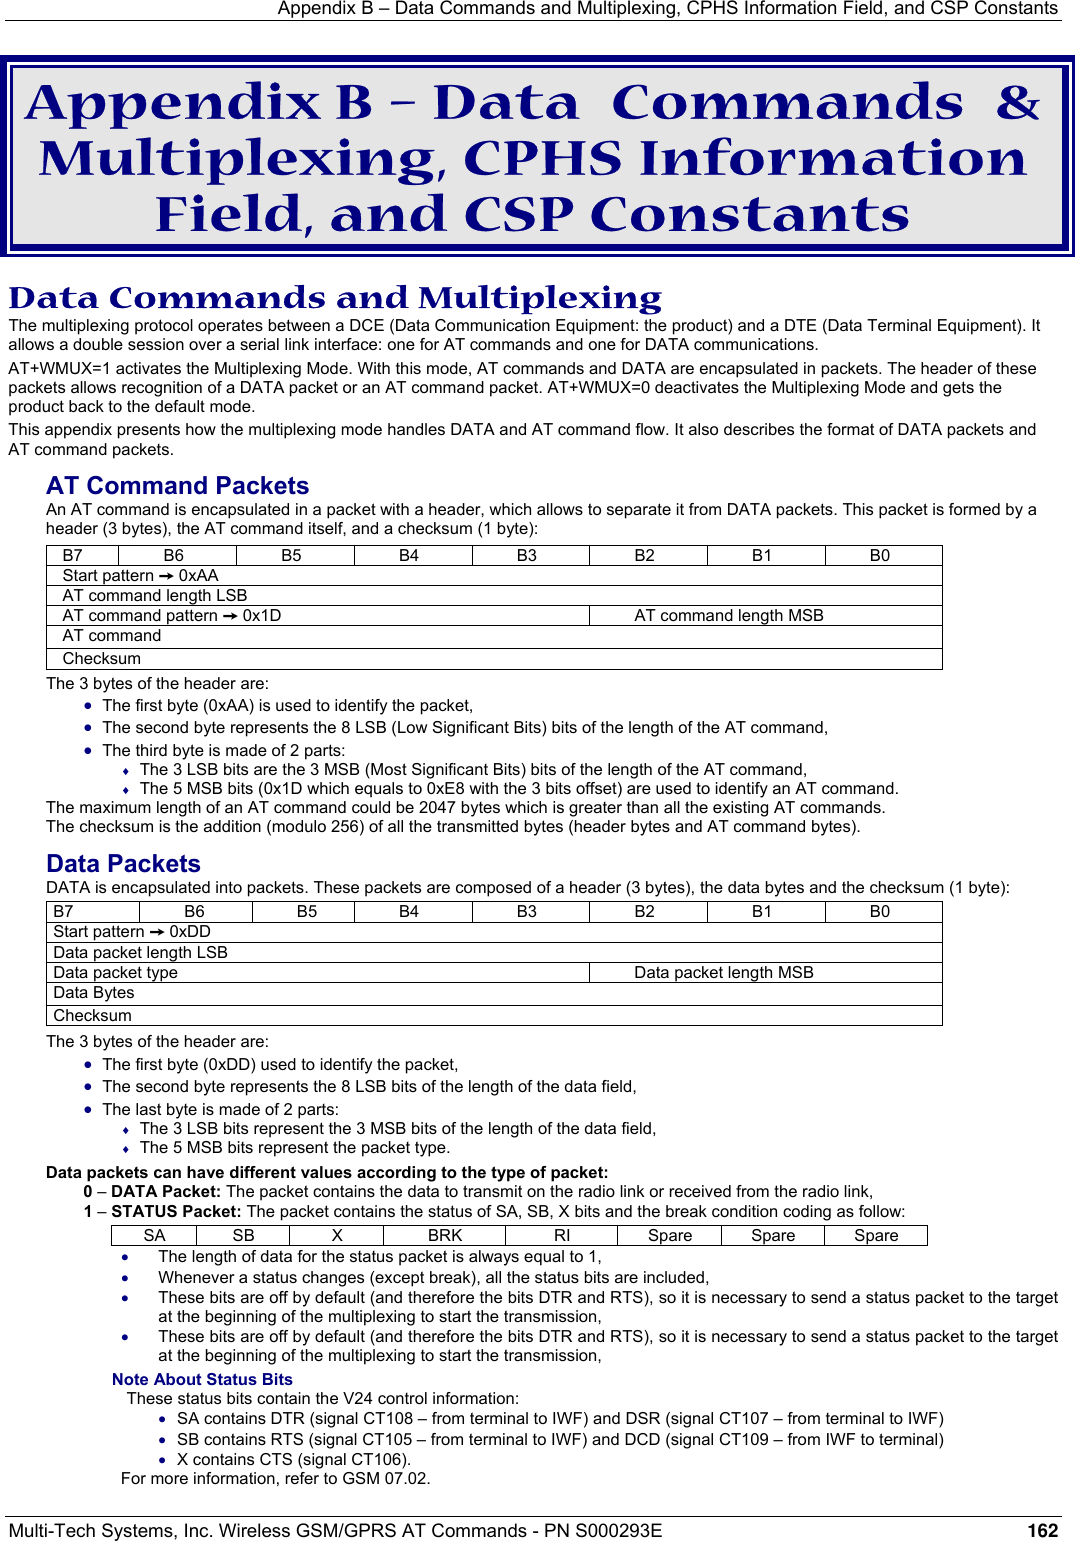 Appendix B – Data Commands and Multiplexing, CPHS Information Field, and CSP Constants Multi-Tech Systems, Inc. Wireless GSM/GPRS AT Commands - PN S000293E 162  Appendix B – Data  Commands  &amp; Multiplexing, CPHS Information Field, and CSP Constants  Data Commands and Multiplexing The multiplexing protocol operates between a DCE (Data Communication Equipment: the product) and a DTE (Data Terminal Equipment). It allows a double session over a serial link interface: one for AT commands and one for DATA communications. AT+WMUX=1 activates the Multiplexing Mode. With this mode, AT commands and DATA are encapsulated in packets. The header of these packets allows recognition of a DATA packet or an AT command packet. AT+WMUX=0 deactivates the Multiplexing Mode and gets the product back to the default mode. This appendix presents how the multiplexing mode handles DATA and AT command flow. It also describes the format of DATA packets and AT command packets. AT Command Packets An AT command is encapsulated in a packet with a header, which allows to separate it from DATA packets. This packet is formed by a header (3 bytes), the AT command itself, and a checksum (1 byte): B7 B6 B5 B4 B3 B2 B1 B0 Start pattern ¨ 0xAA AT command length LSB AT command pattern ¨ 0x1D  AT command length MSB AT command Checksum The 3 bytes of the header are: • The first byte (0xAA) is used to identify the packet, • The second byte represents the 8 LSB (Low Significant Bits) bits of the length of the AT command, • The third byte is made of 2 parts: ♦ The 3 LSB bits are the 3 MSB (Most Significant Bits) bits of the length of the AT command, ♦ The 5 MSB bits (0x1D which equals to 0xE8 with the 3 bits offset) are used to identify an AT command. The maximum length of an AT command could be 2047 bytes which is greater than all the existing AT commands.  The checksum is the addition (modulo 256) of all the transmitted bytes (header bytes and AT command bytes). Data Packets DATA is encapsulated into packets. These packets are composed of a header (3 bytes), the data bytes and the checksum (1 byte): B7  B6 B5 B4 B3 B2 B1 B0 Start pattern ¨ 0xDD Data packet length LSB Data packet type  Data packet length MSB Data Bytes Checksum The 3 bytes of the header are: • The first byte (0xDD) used to identify the packet, • The second byte represents the 8 LSB bits of the length of the data field, • The last byte is made of 2 parts: ♦ The 3 LSB bits represent the 3 MSB bits of the length of the data field, ♦ The 5 MSB bits represent the packet type. Data packets can have different values according to the type of packet: 0 – DATA Packet: The packet contains the data to transmit on the radio link or received from the radio link, 1 – STATUS Packet: The packet contains the status of SA, SB, X bits and the break condition coding as follow: SA  SB  X  BRK  RI  Spare Spare Spare • The length of data for the status packet is always equal to 1, • Whenever a status changes (except break), all the status bits are included, • These bits are off by default (and therefore the bits DTR and RTS), so it is necessary to send a status packet to the target at the beginning of the multiplexing to start the transmission, • These bits are off by default (and therefore the bits DTR and RTS), so it is necessary to send a status packet to the target at the beginning of the multiplexing to start the transmission, Note About Status Bits  These status bits contain the V24 control information: • SA contains DTR (signal CT108 – from terminal to IWF) and DSR (signal CT107 – from terminal to IWF) • SB contains RTS (signal CT105 – from terminal to IWF) and DCD (signal CT109 – from IWF to terminal) • X contains CTS (signal CT106). For more information, refer to GSM 07.02. 